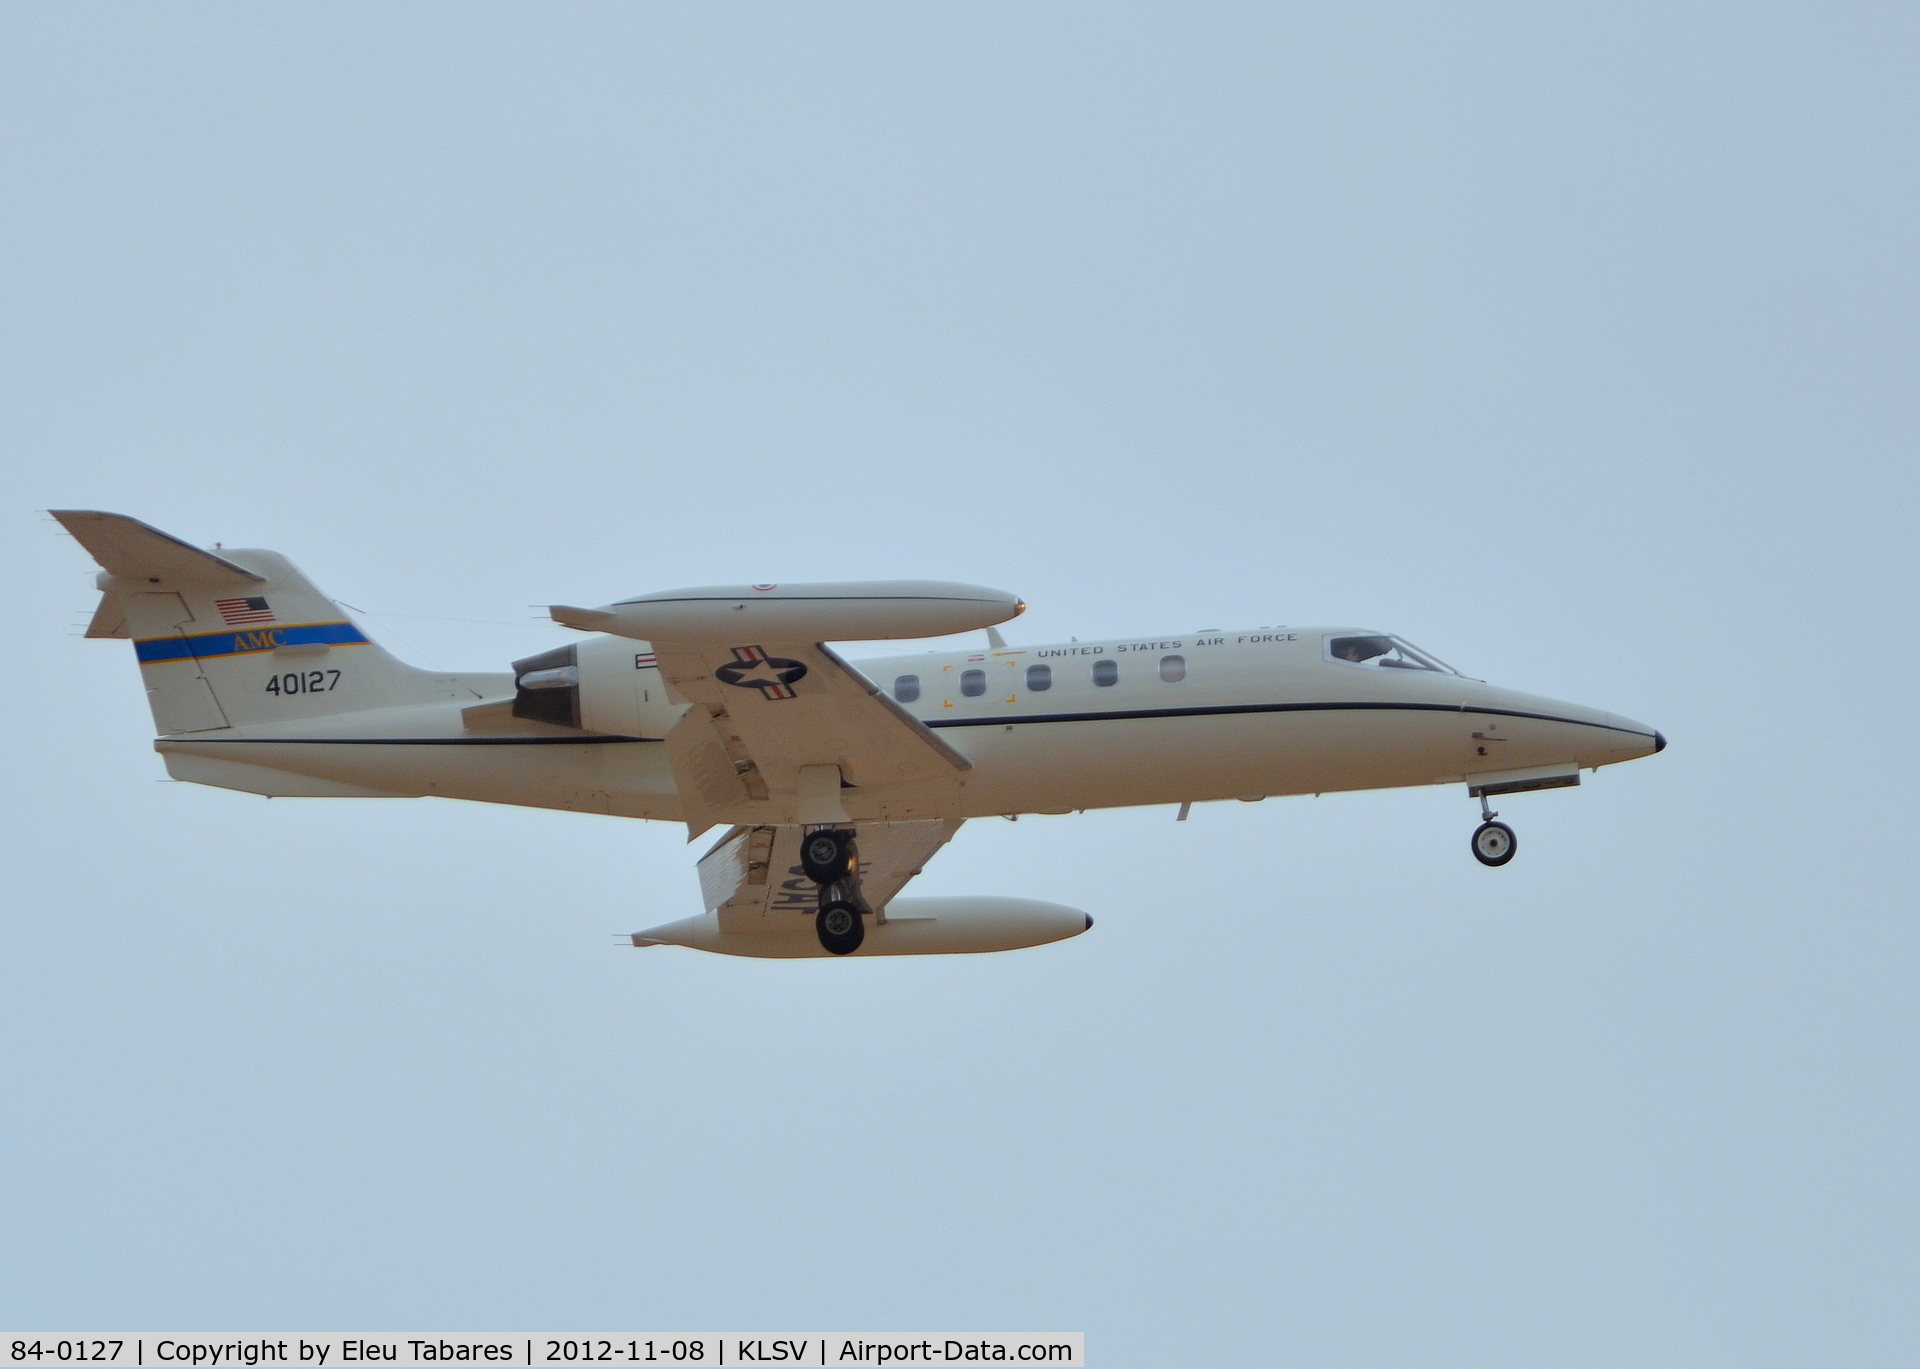 84-0127, 1984 Gates Learjet C-21A C/N 35A-573, Taken over Nellis Air Force Base, Nevada